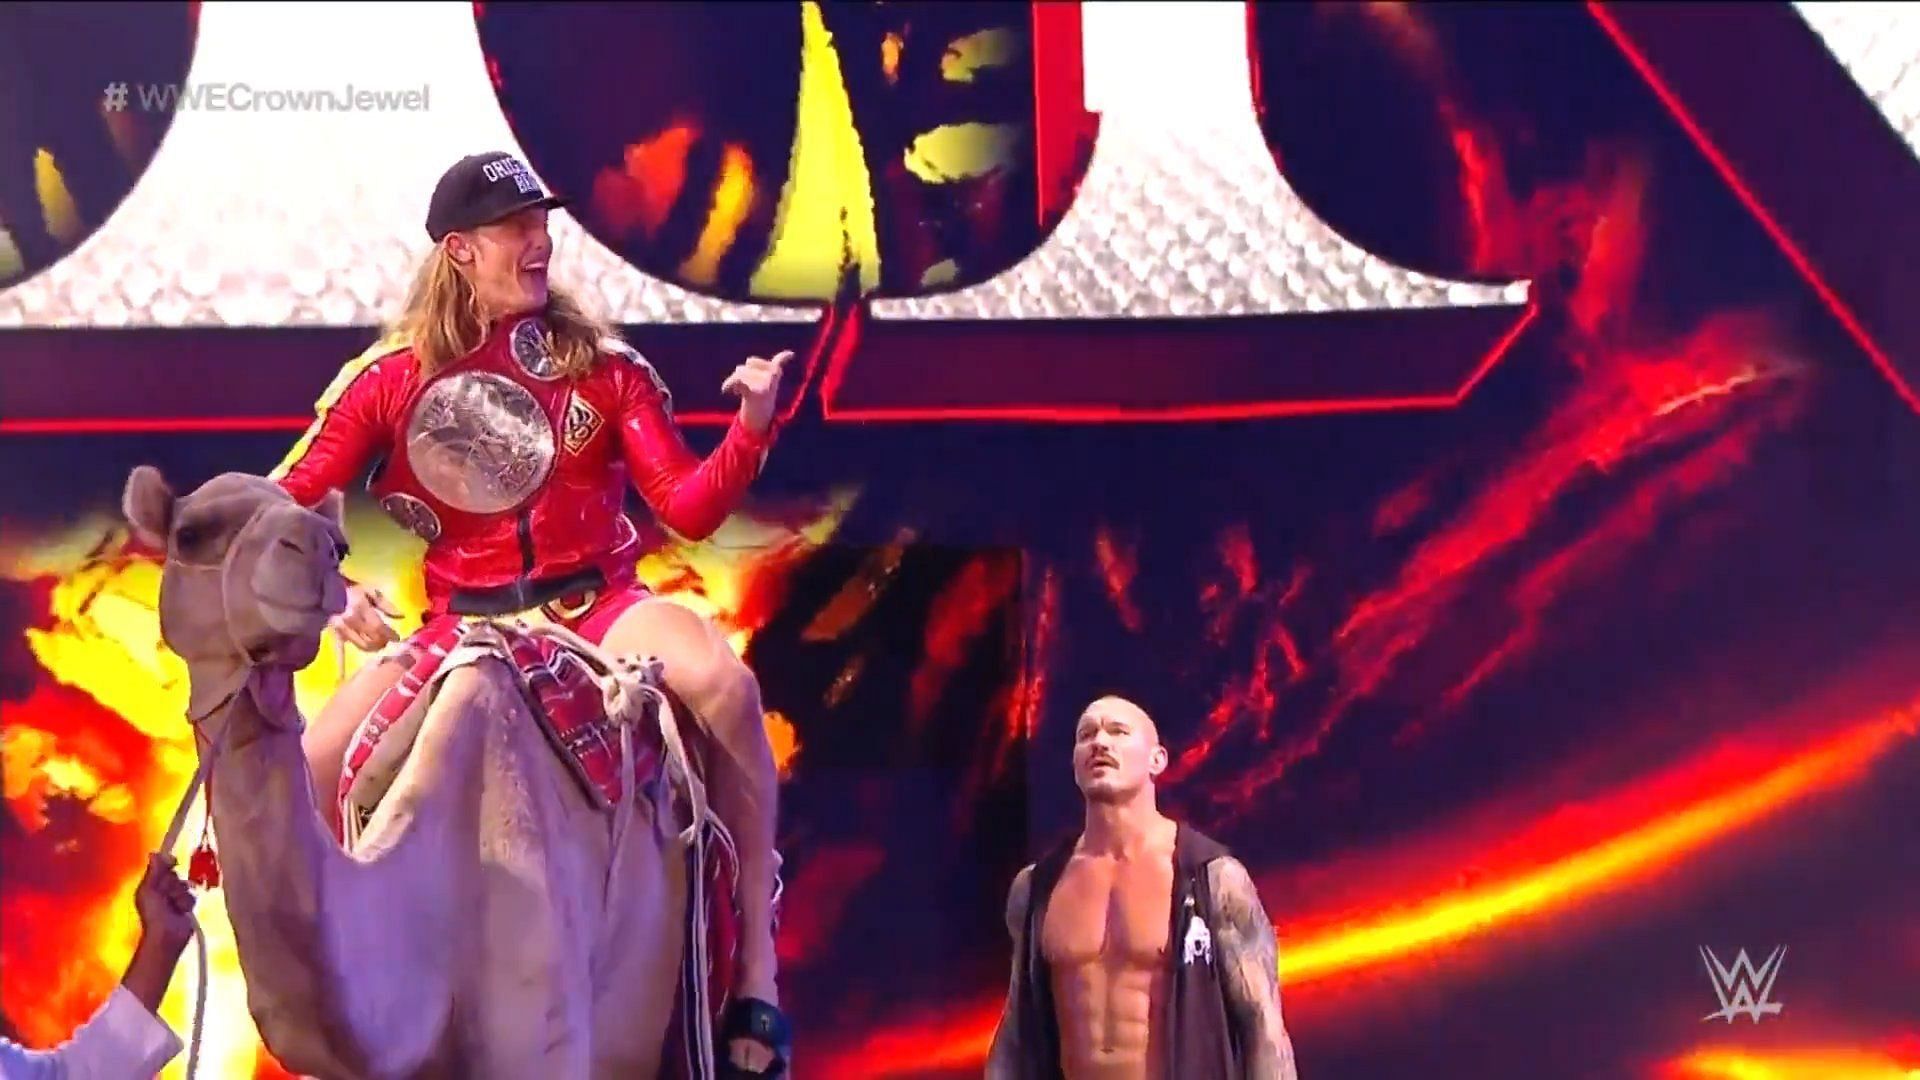 Randy Orton asked to ride a Camel at WWE Crown Jewel but was told no by Vince McMahon.